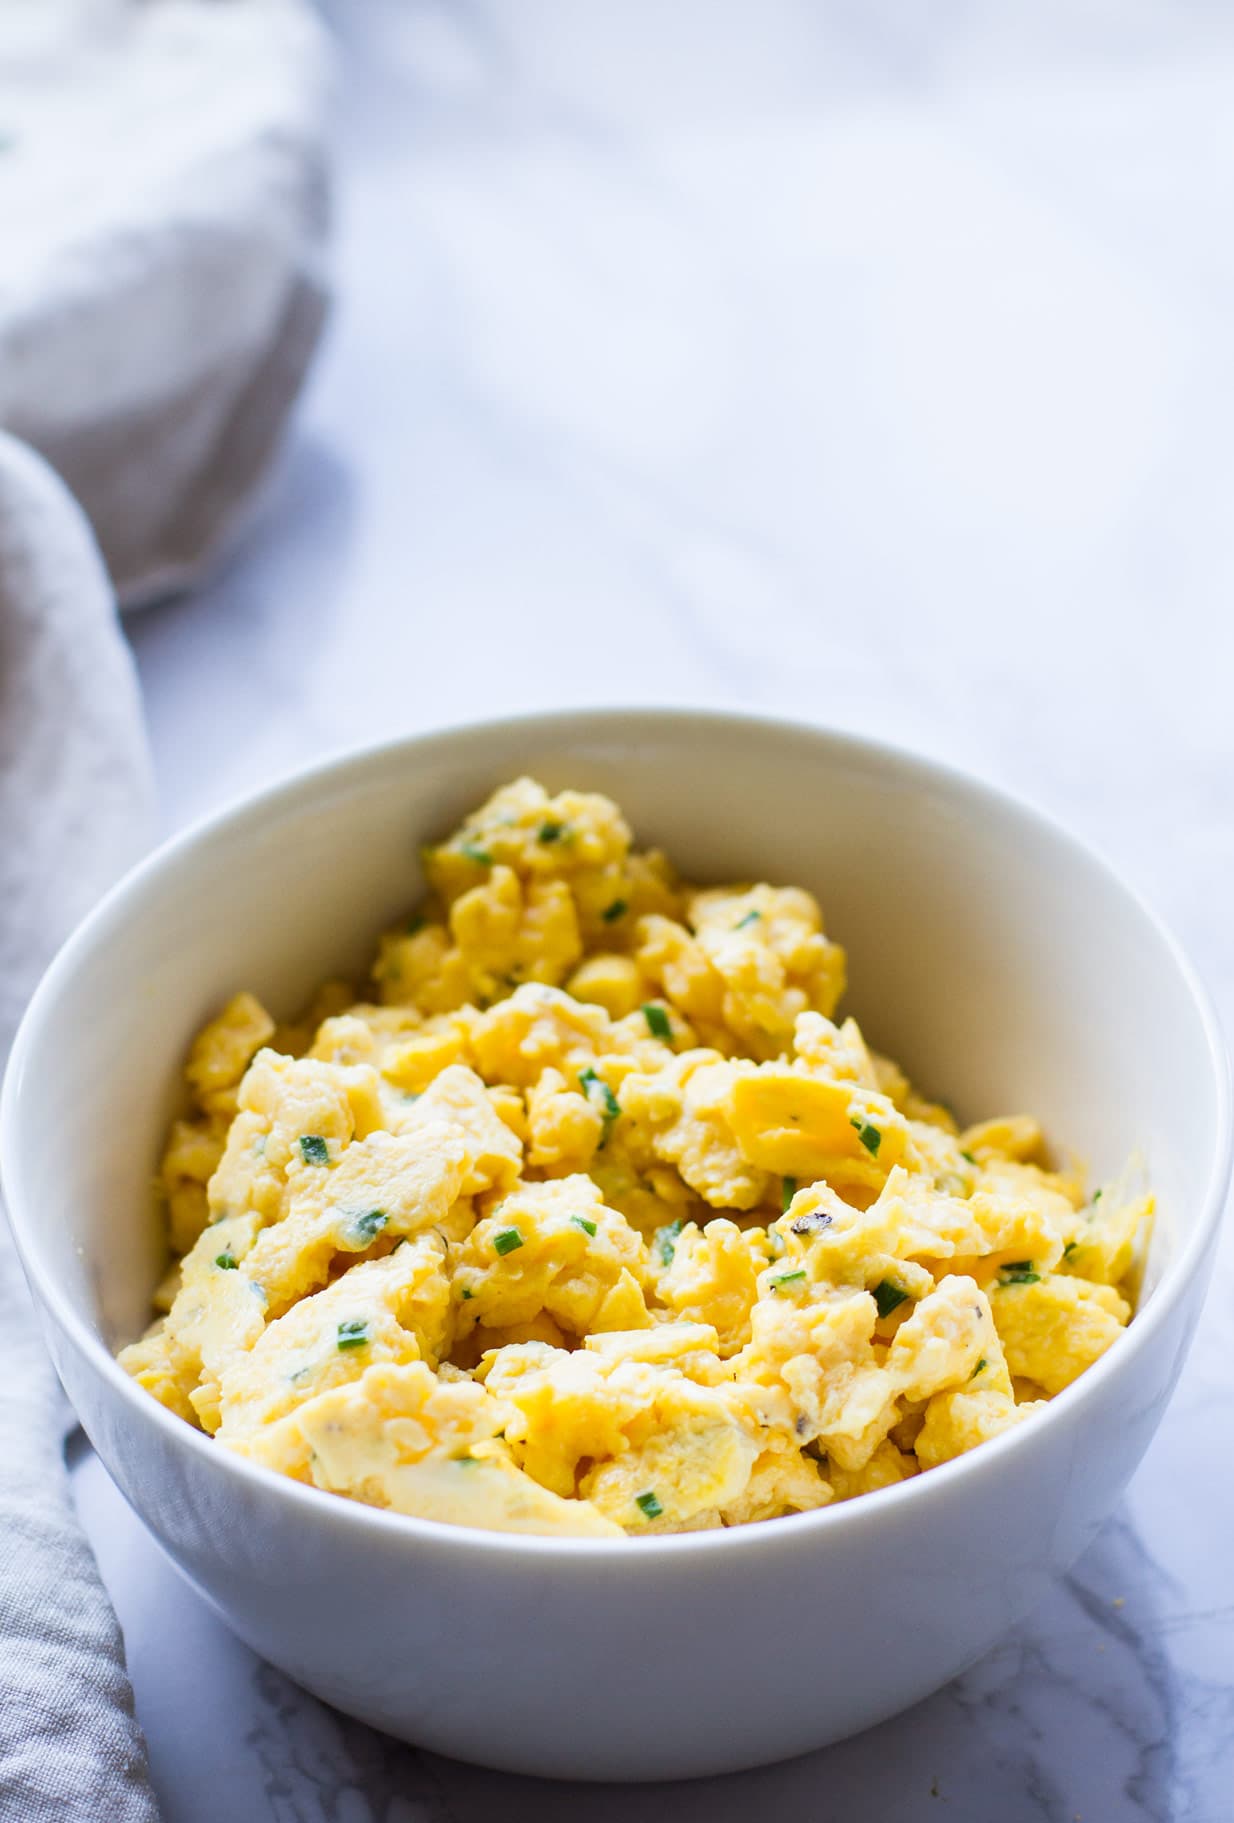 Chives and Cheese Scrambled Eggs